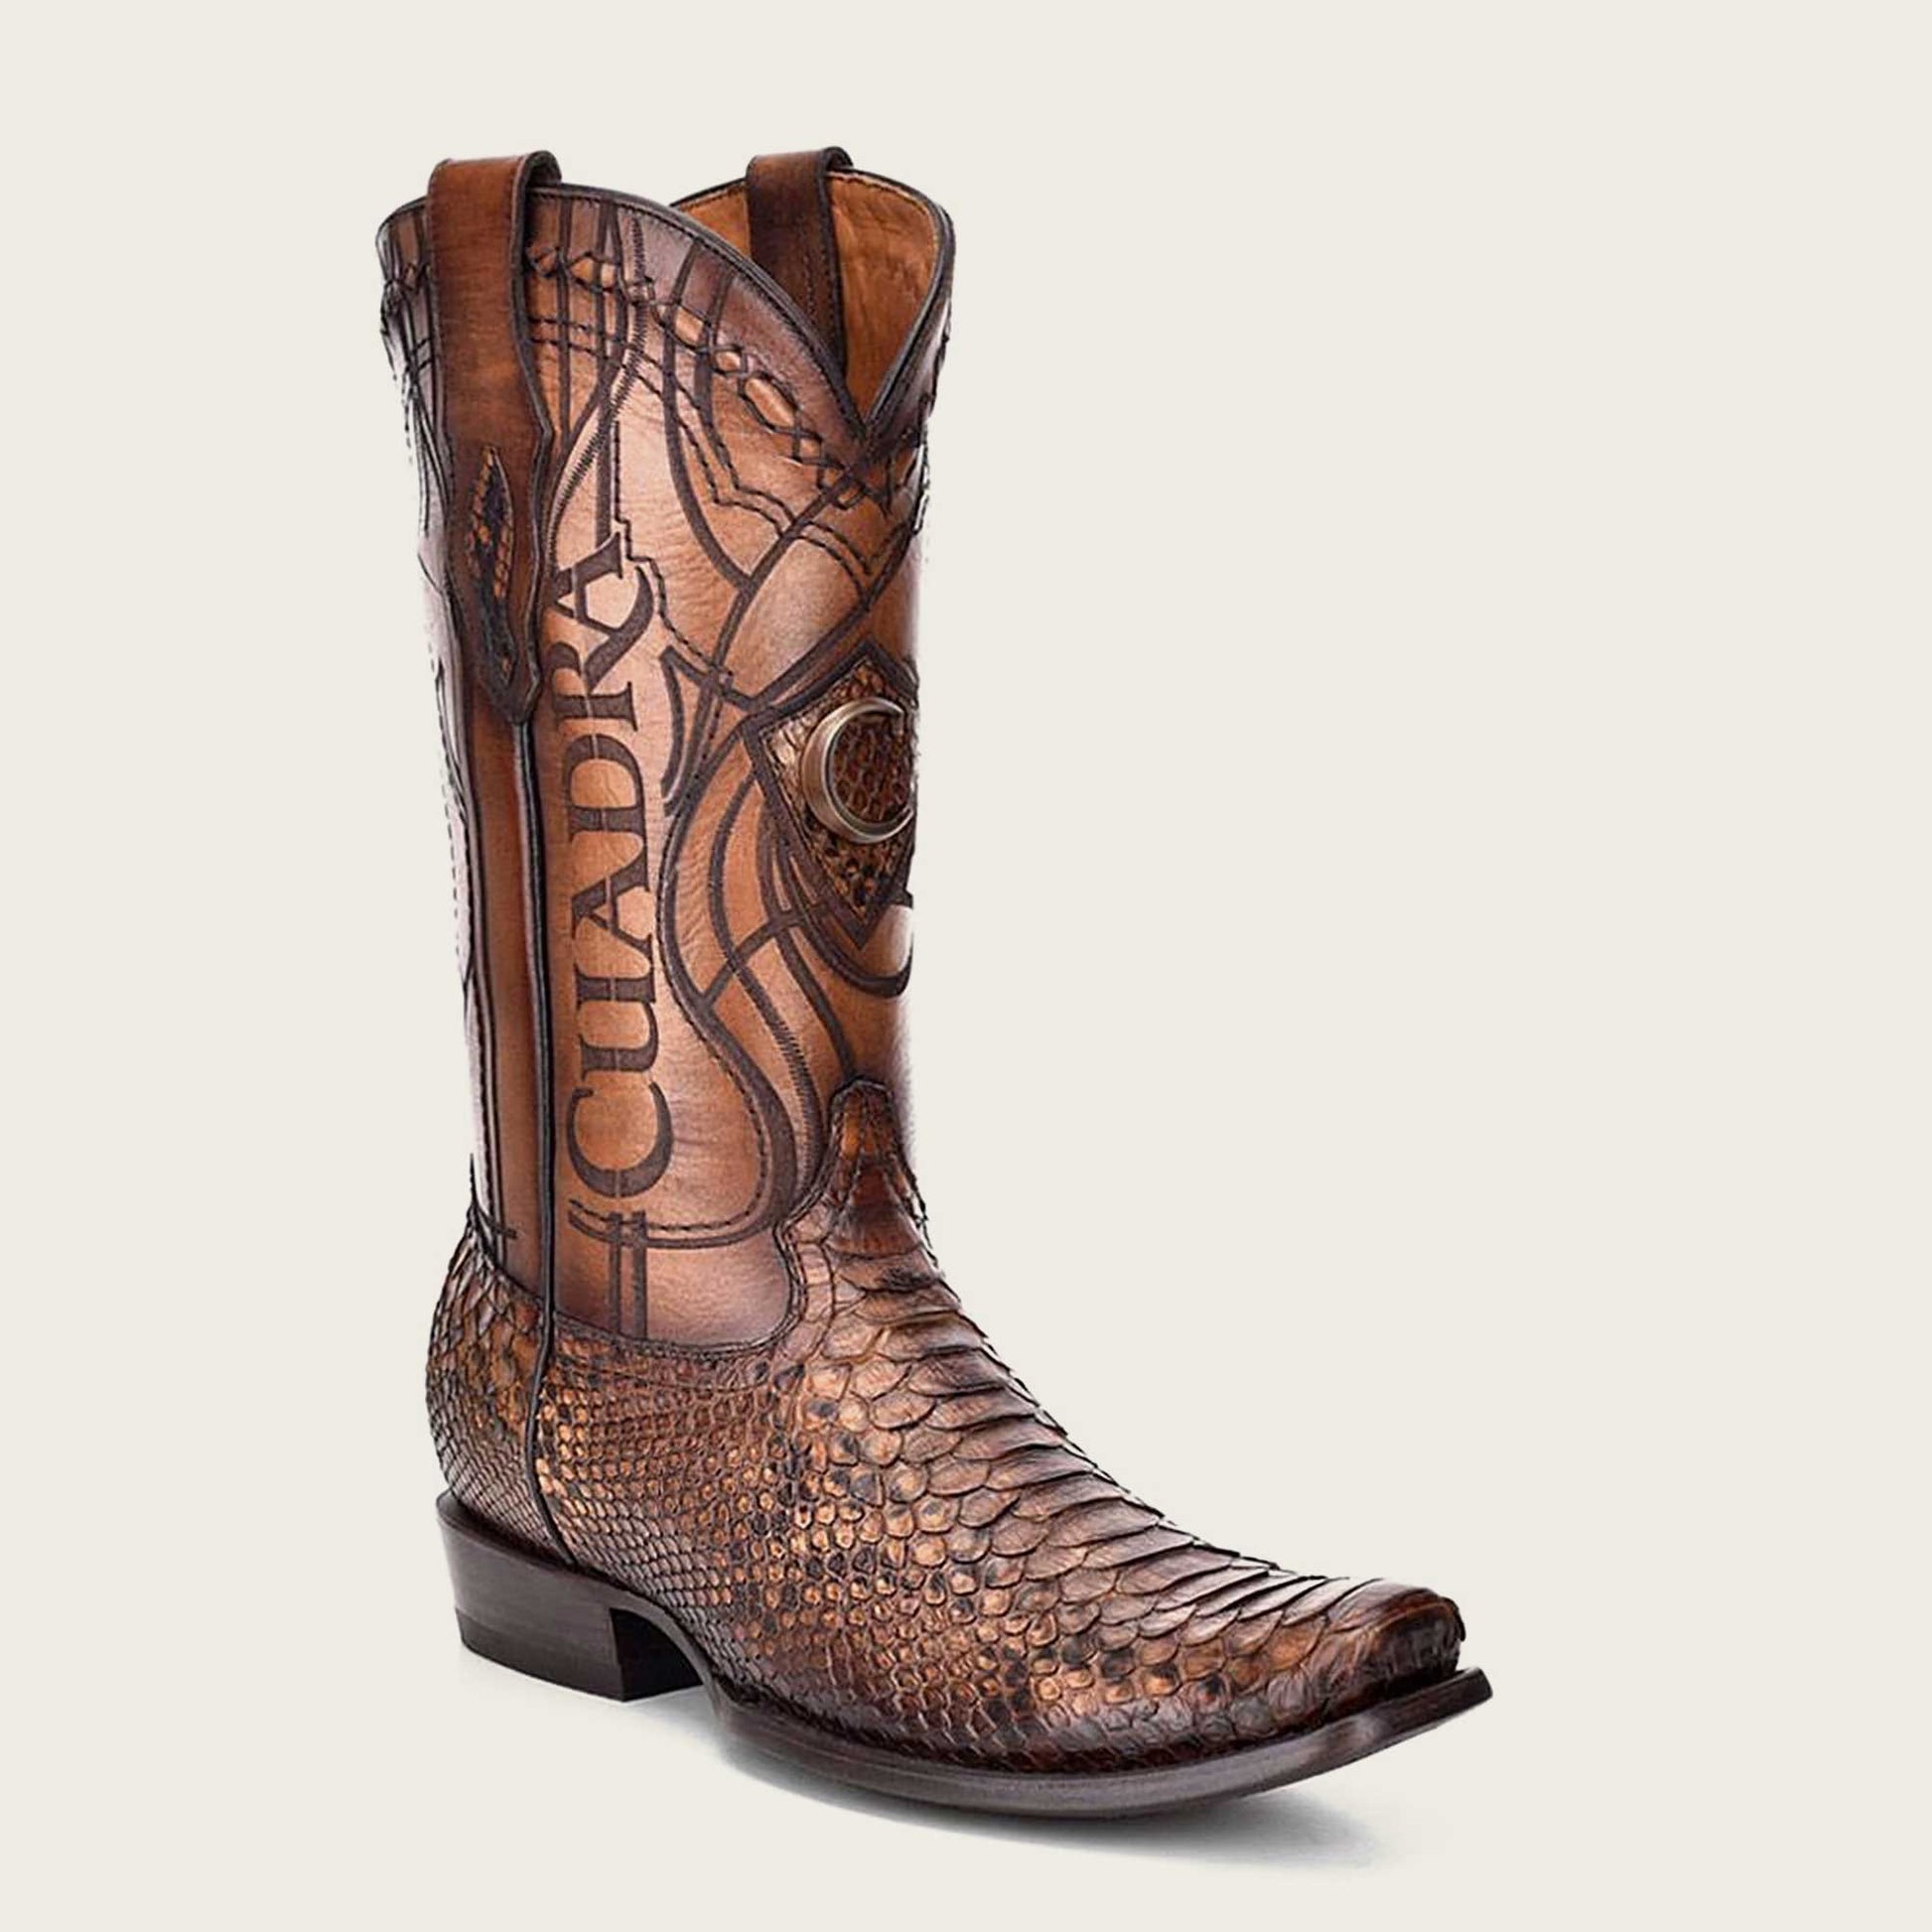 Stylish honey python leather Western boot with intricate engraving and hand-painted finish.